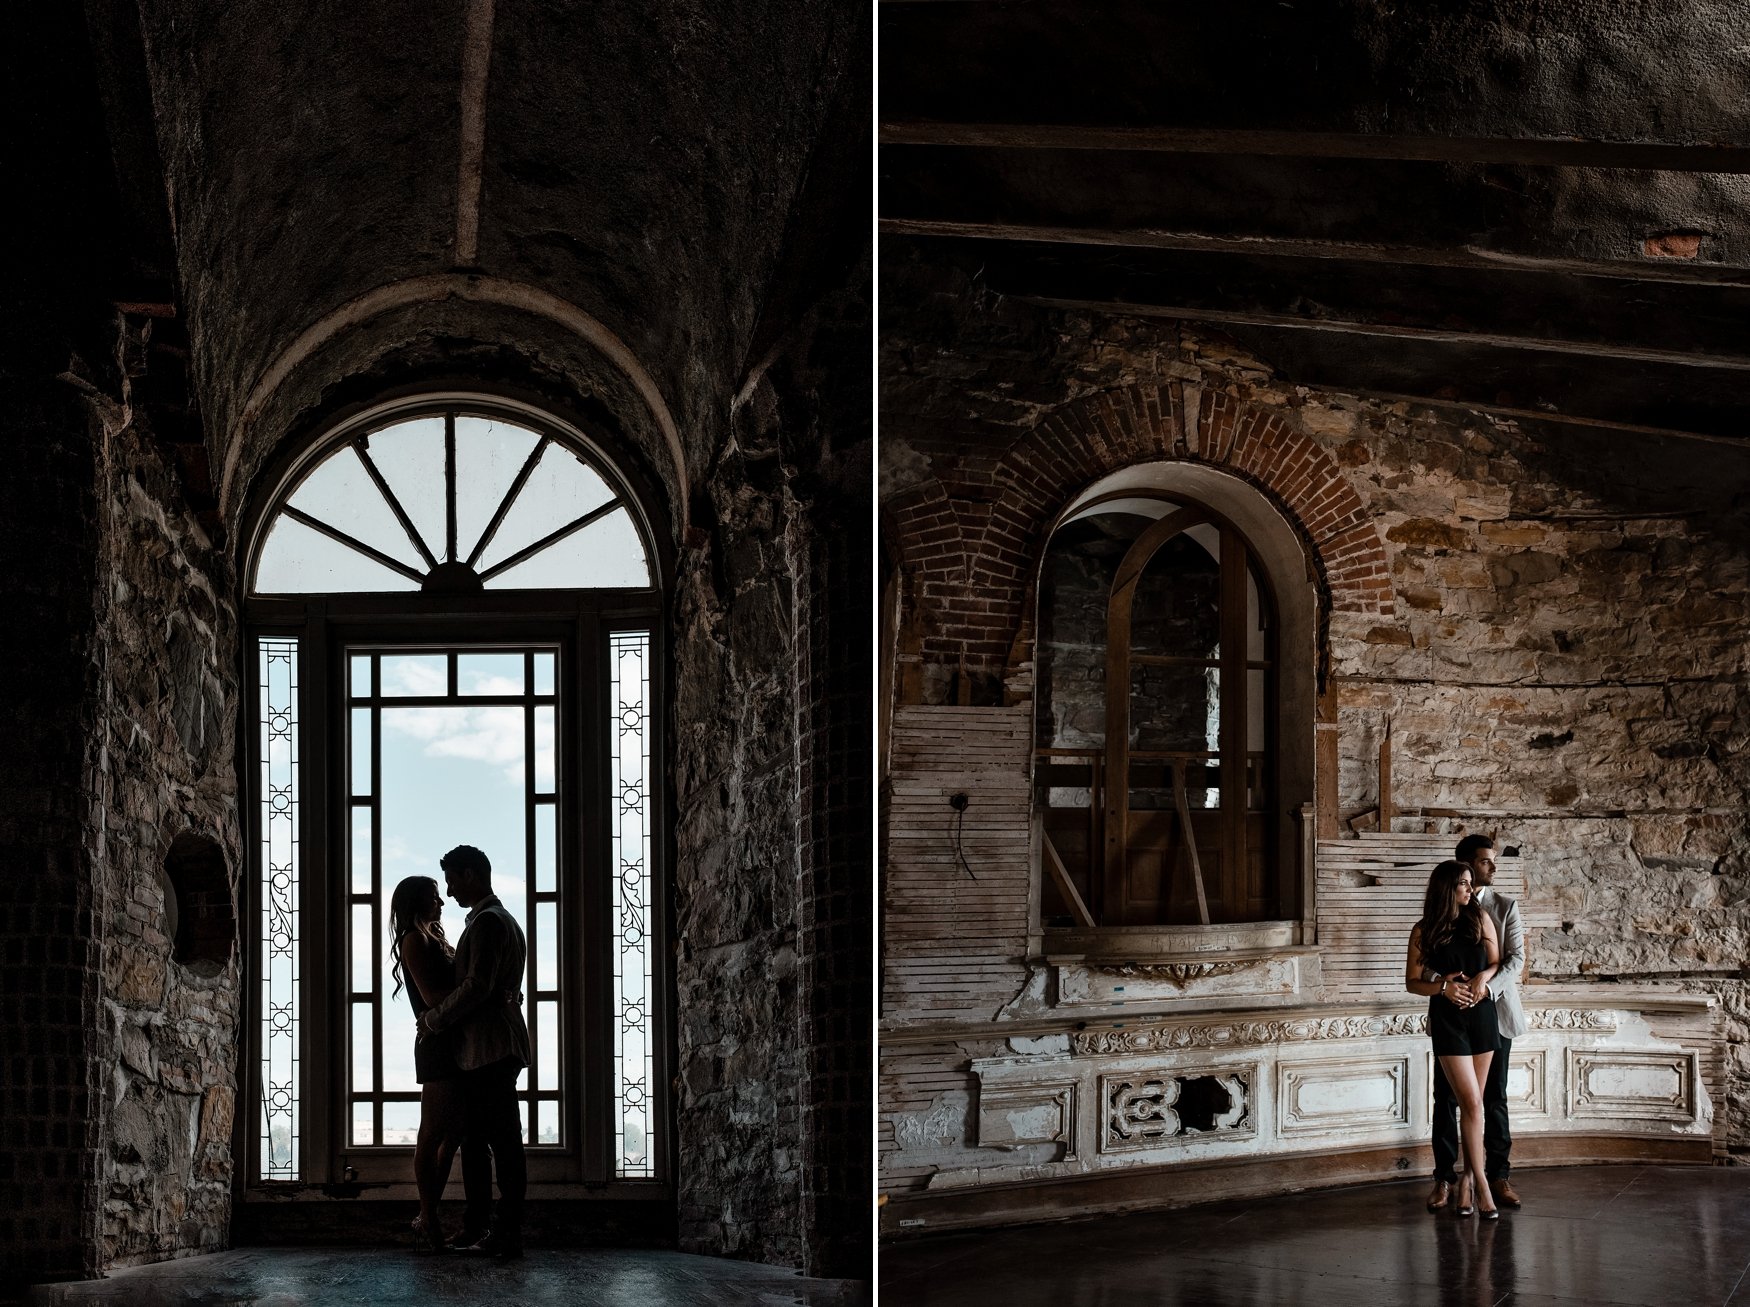 dramatic photographs from an engagement shoot that took place in an old castle (Copy)